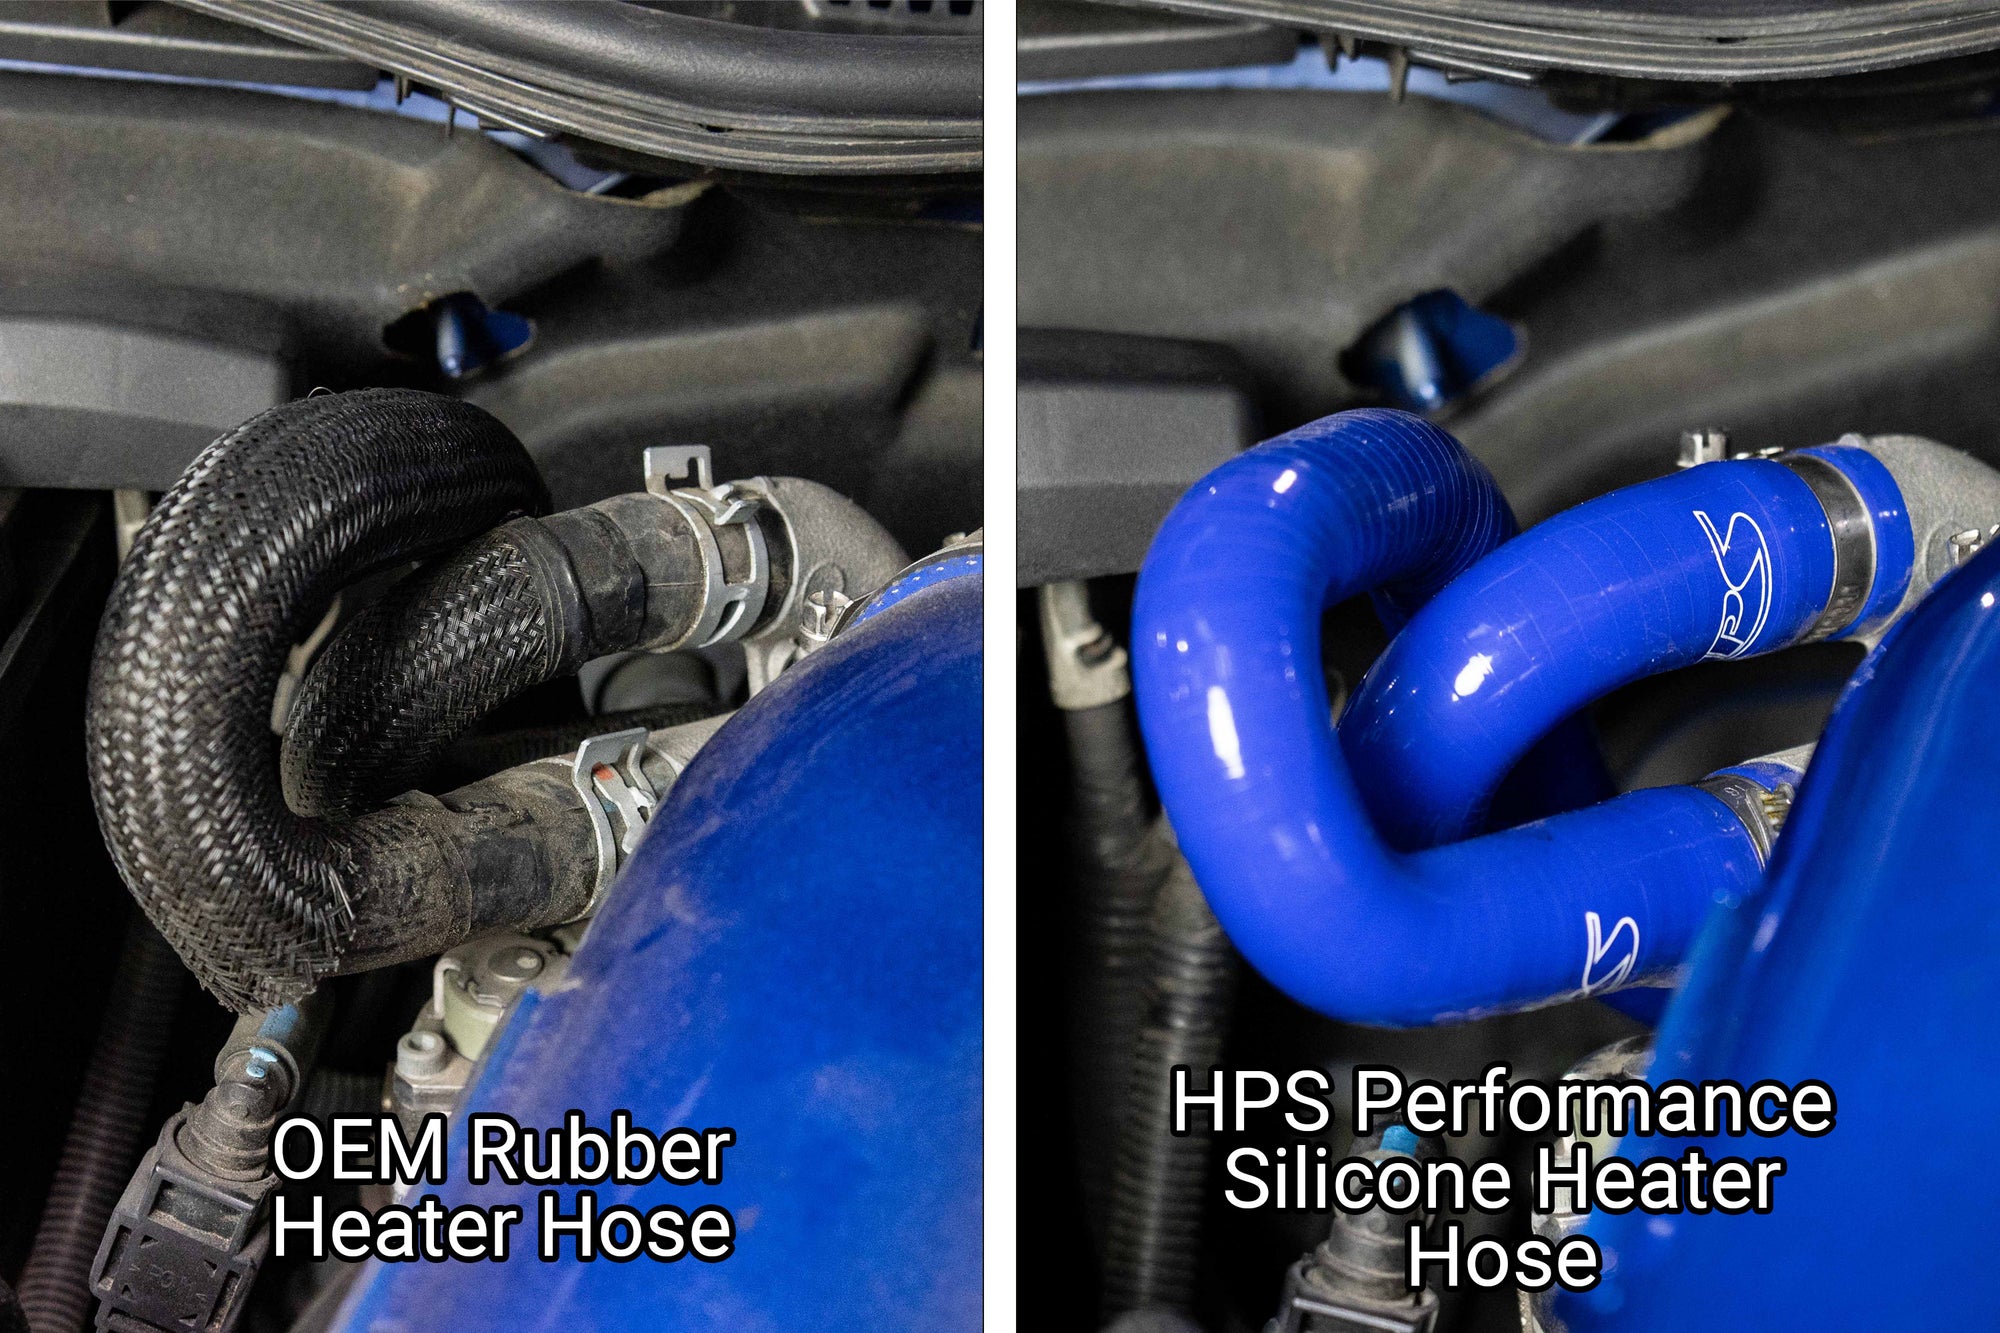 HPS silicone heater hoses replace 2007-2017 Lexus IS350 3.5L V6 OEM part number 87245-53180, 87245-53130